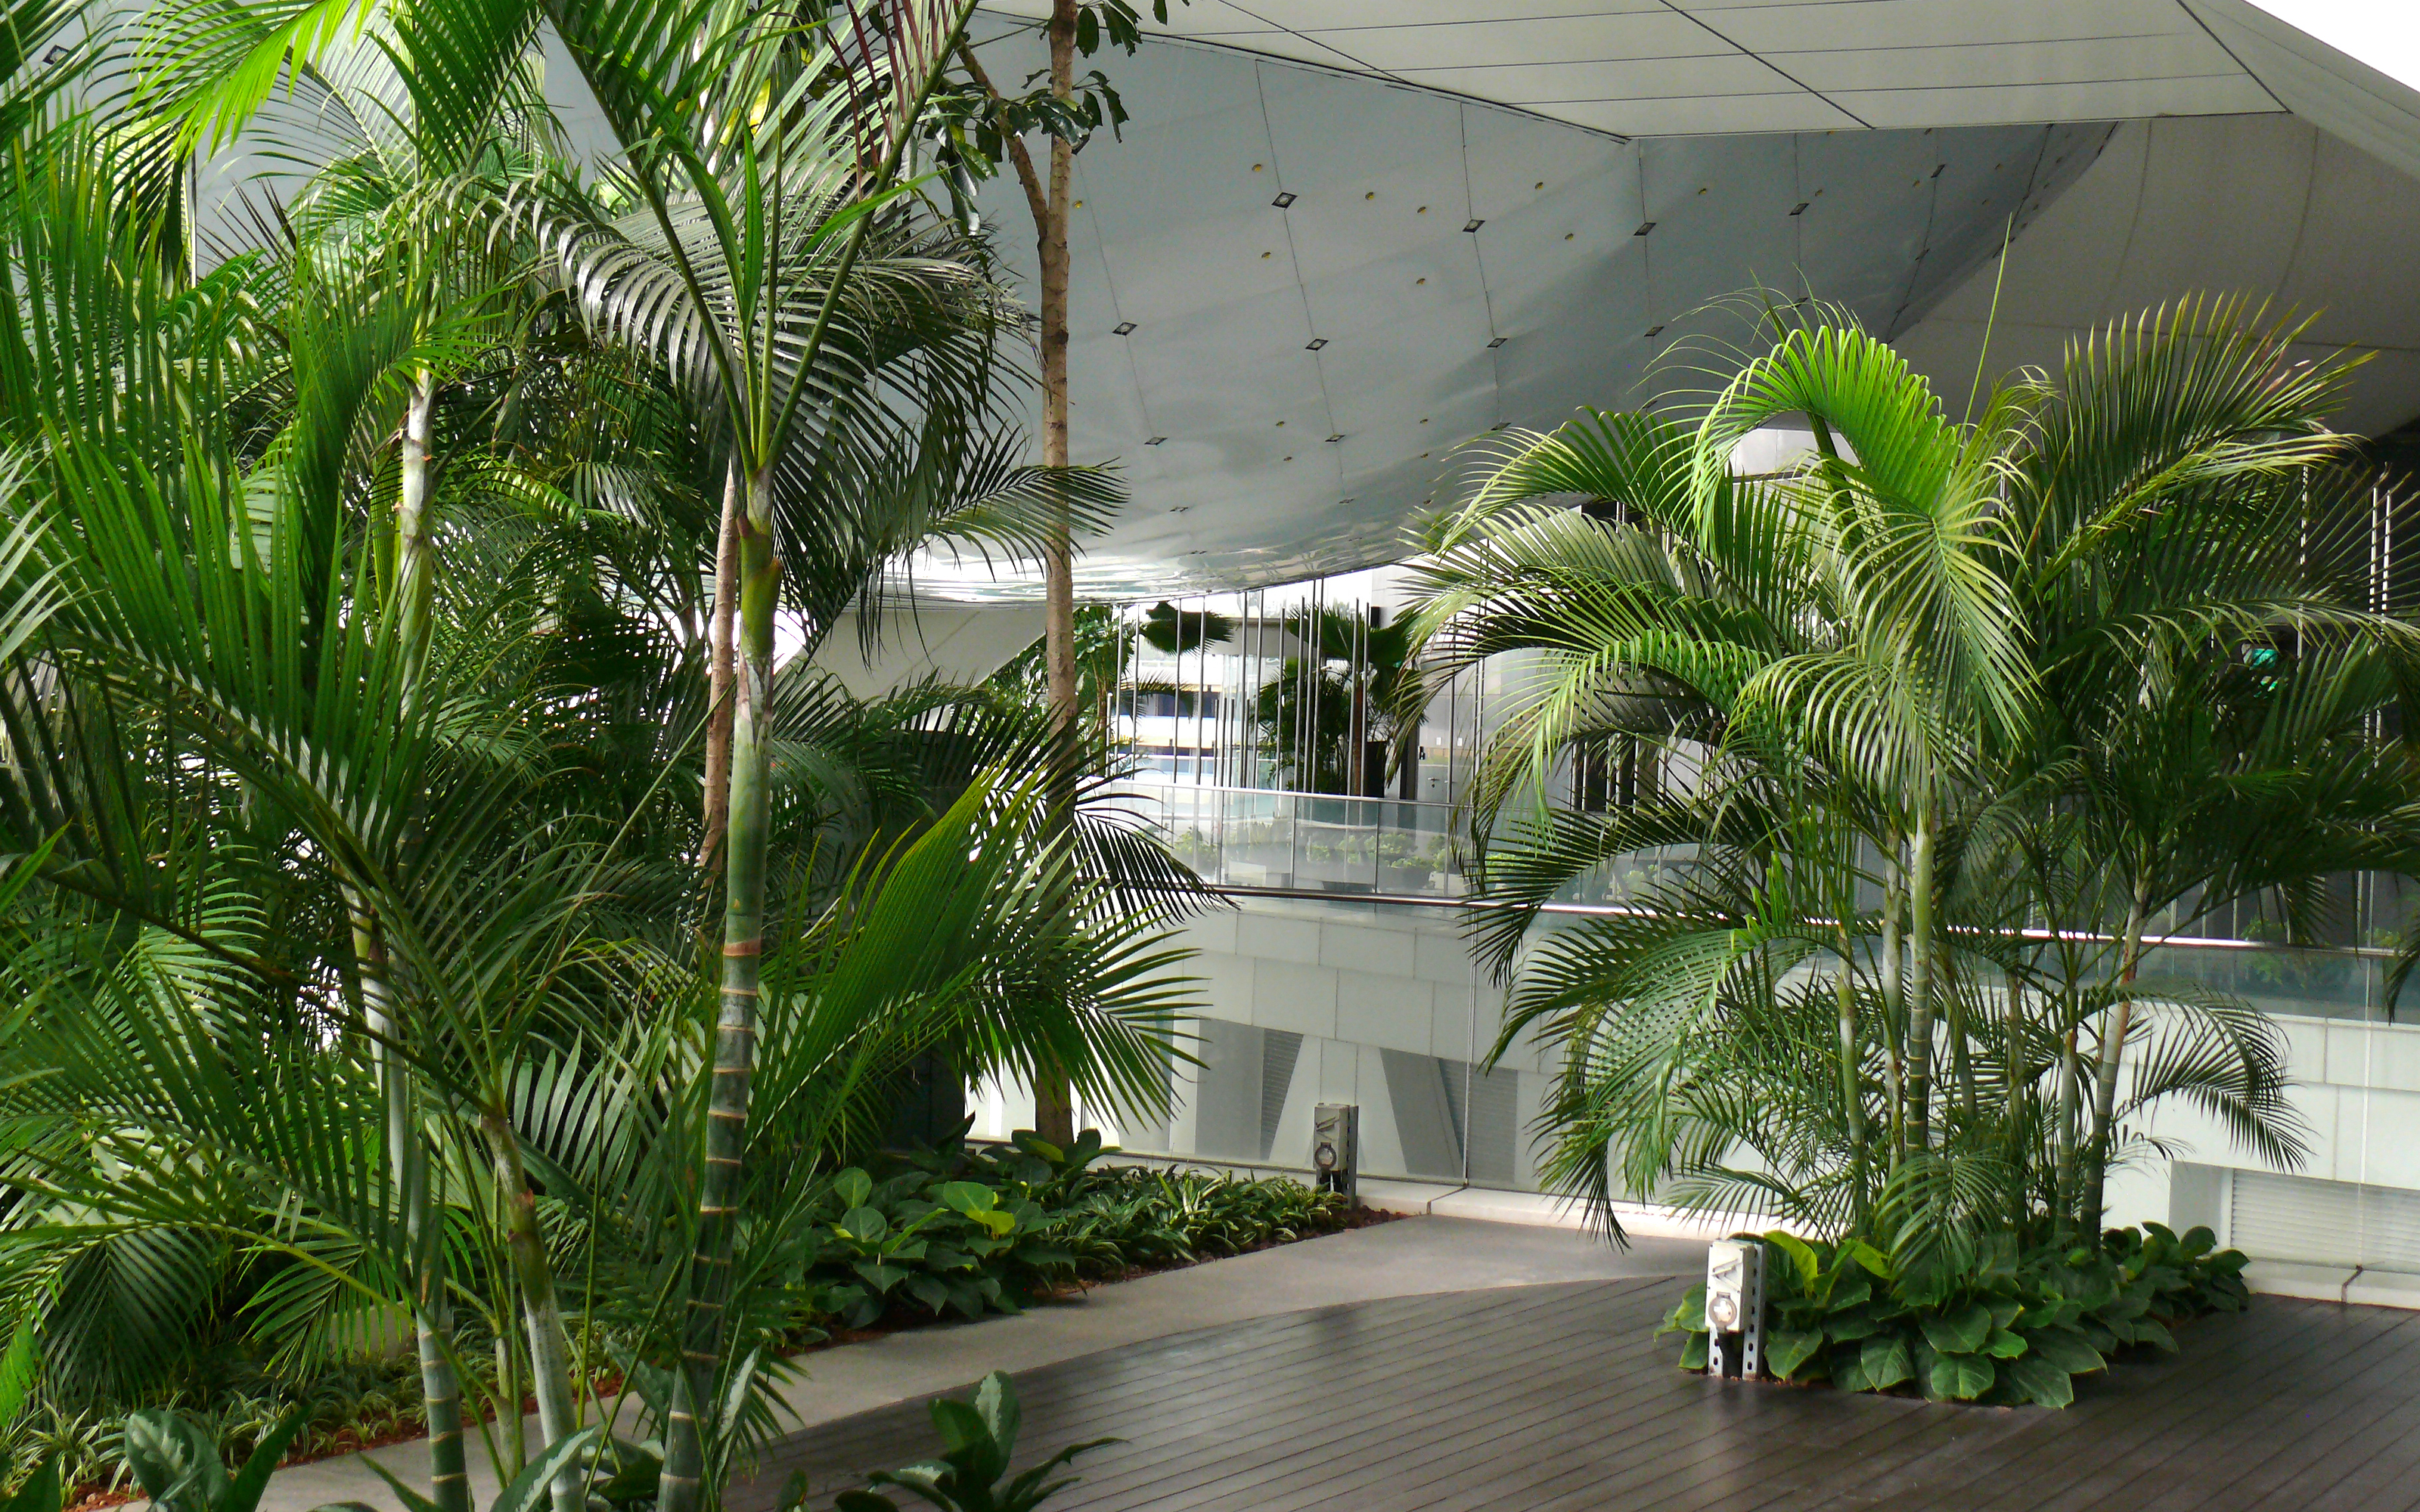 Large palm trees inside a building